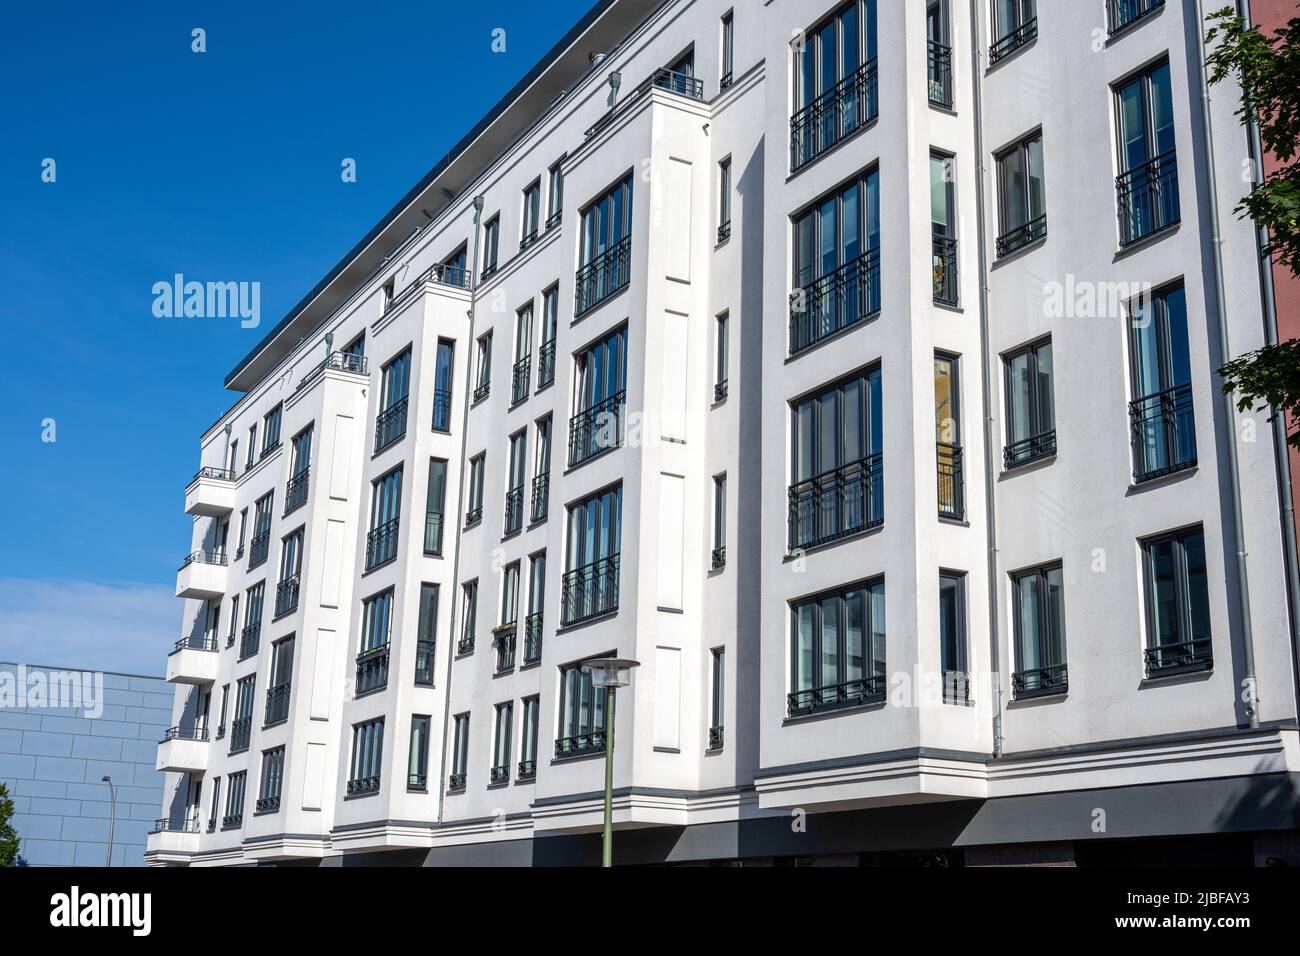 Modern multi-family apartment building seen in Berlin, Germany Stock Photo